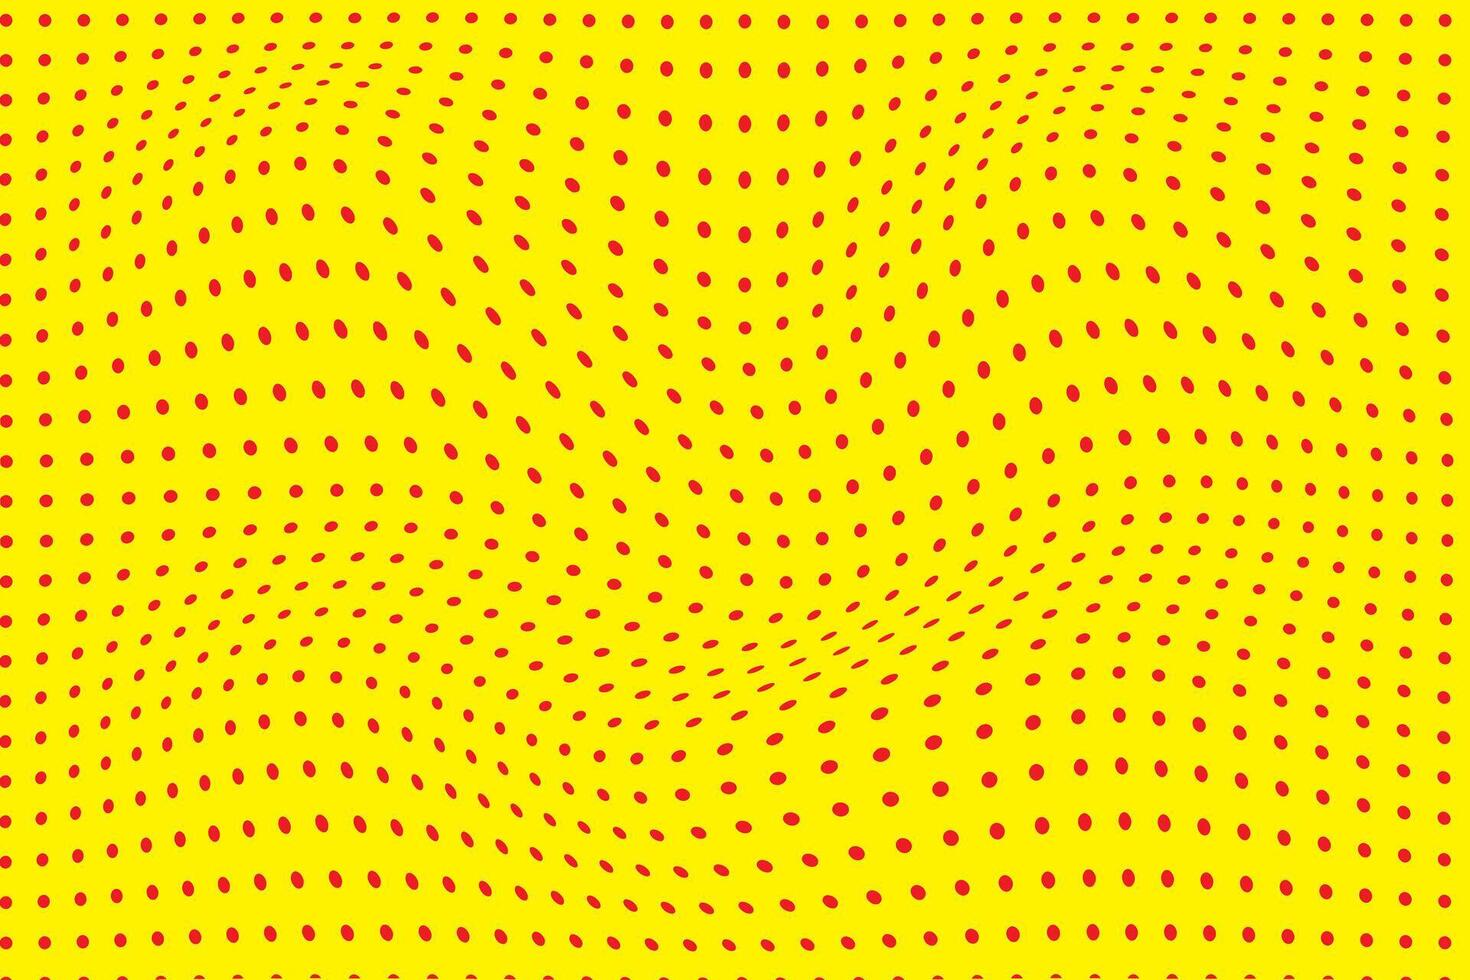 modern simple abstract red color small polka dot wavy distort pattern on yellow background. vector